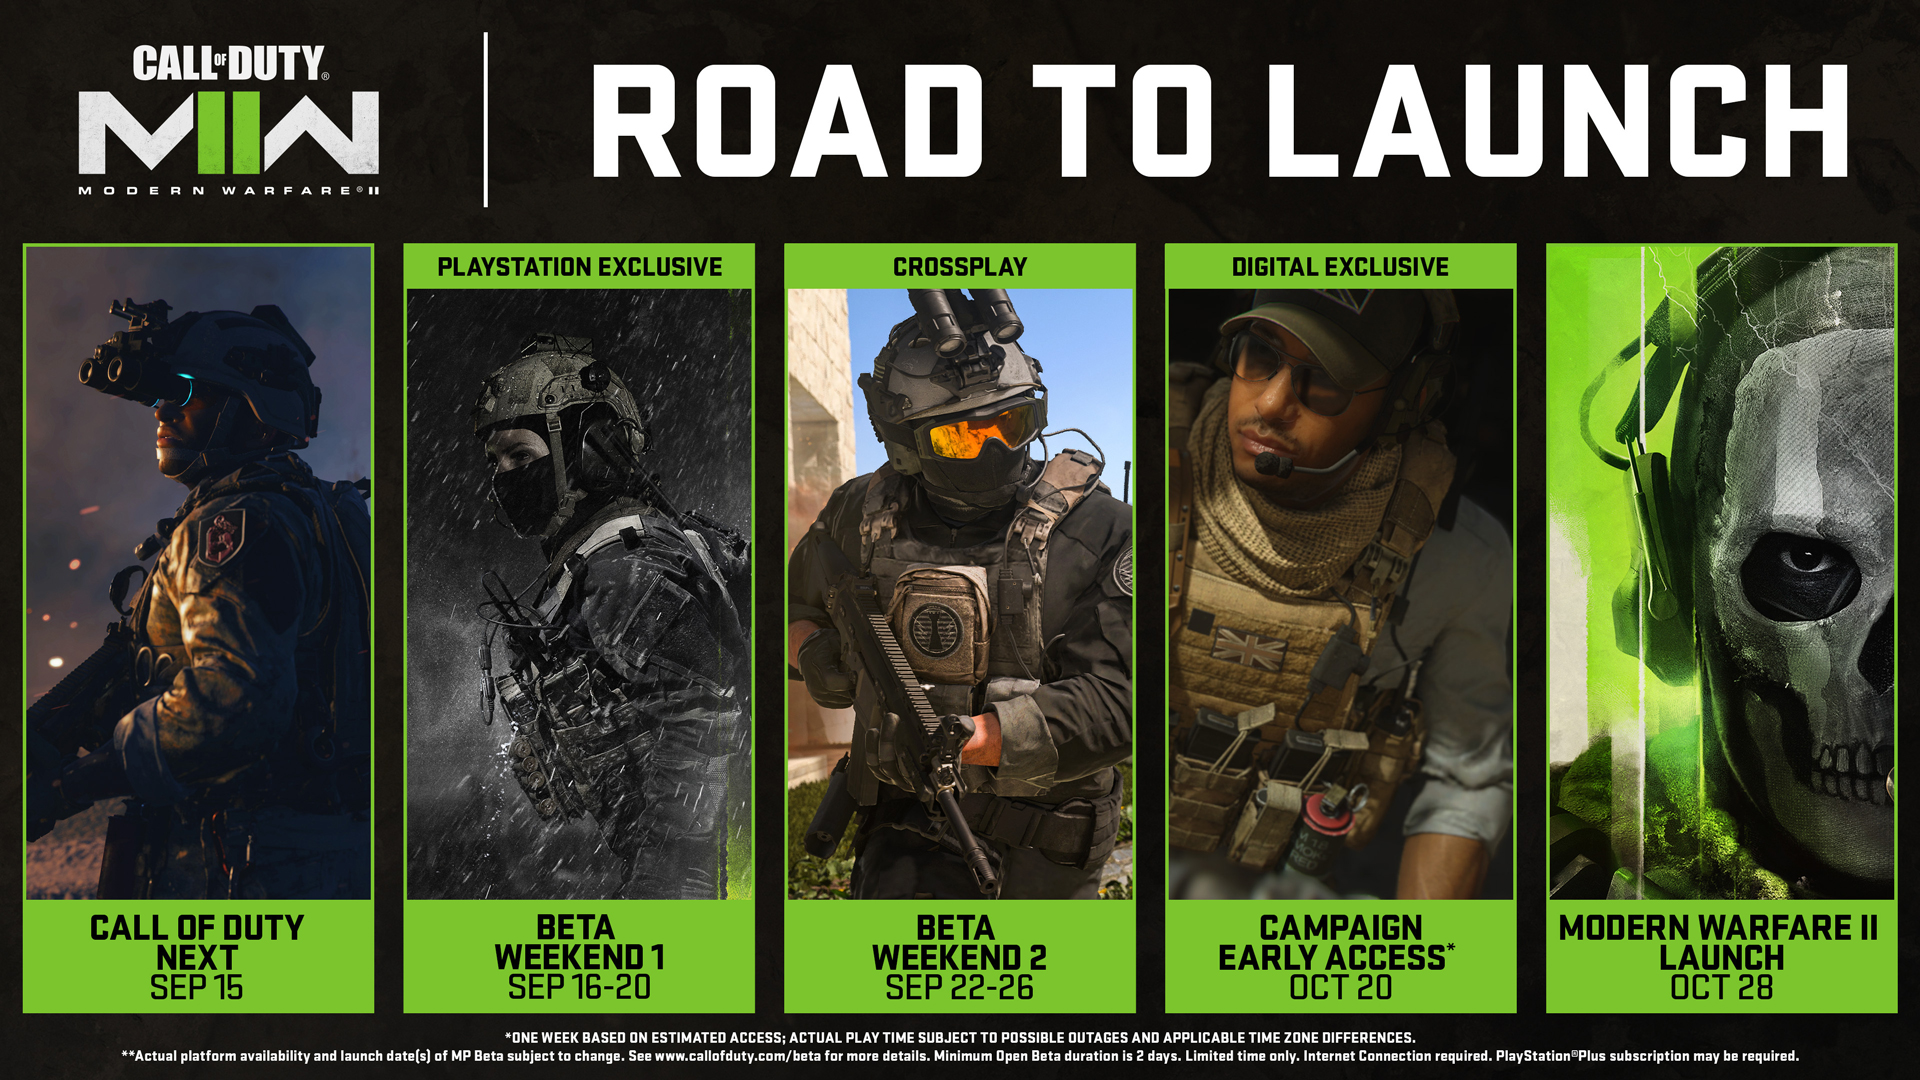 Call of Duty: Modern Warfare II - Campaign Early Access & Road to Launch  Details